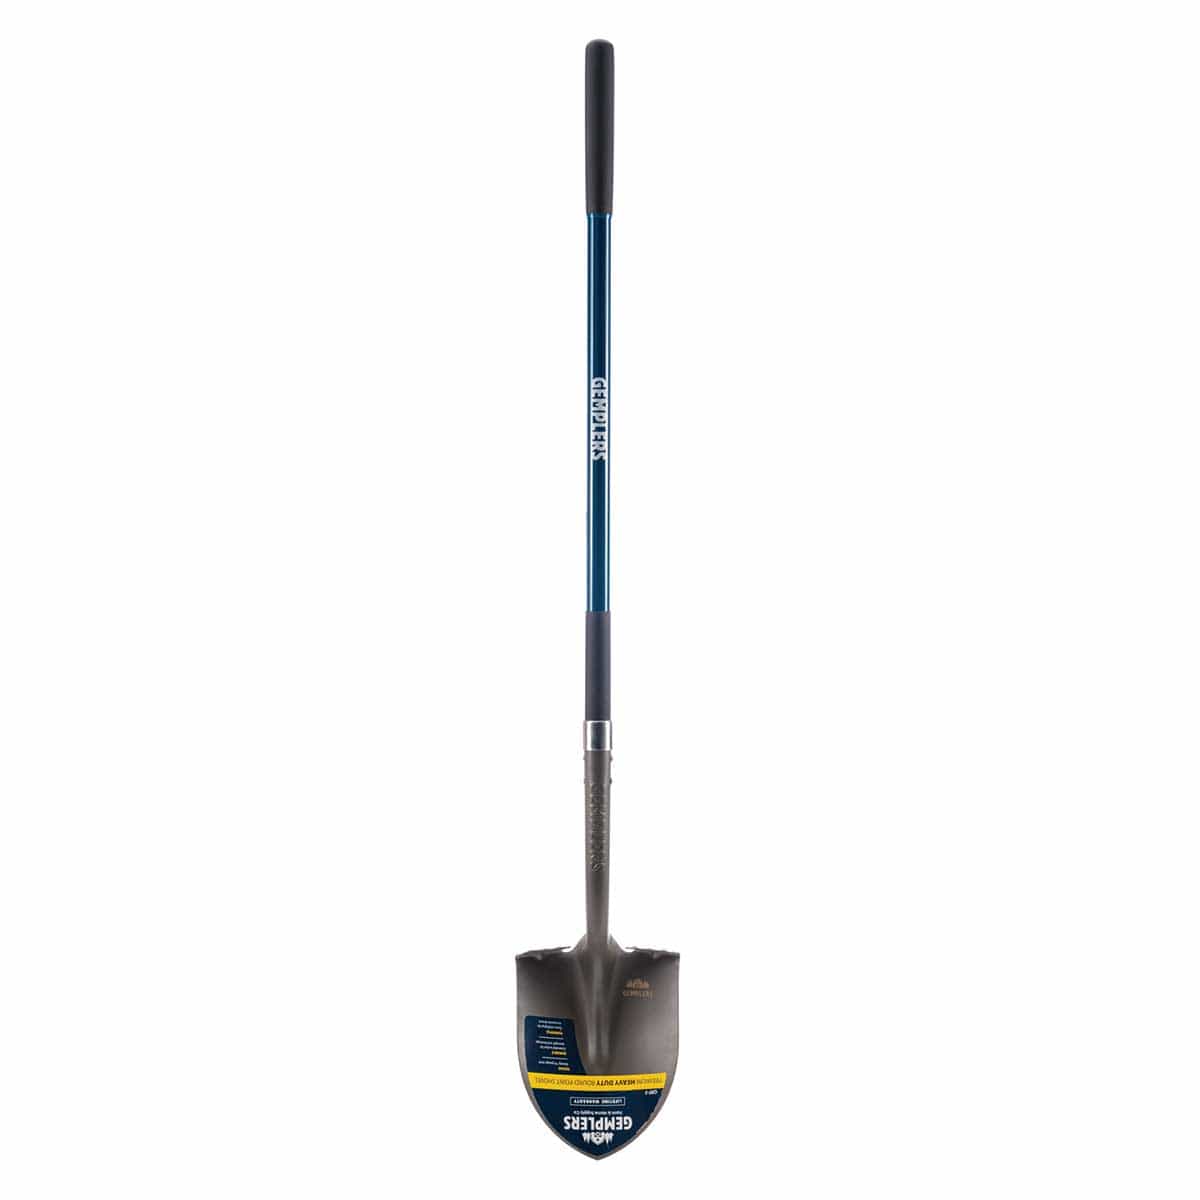 Gemplers Round Point Shovel with Fiberglass Handle